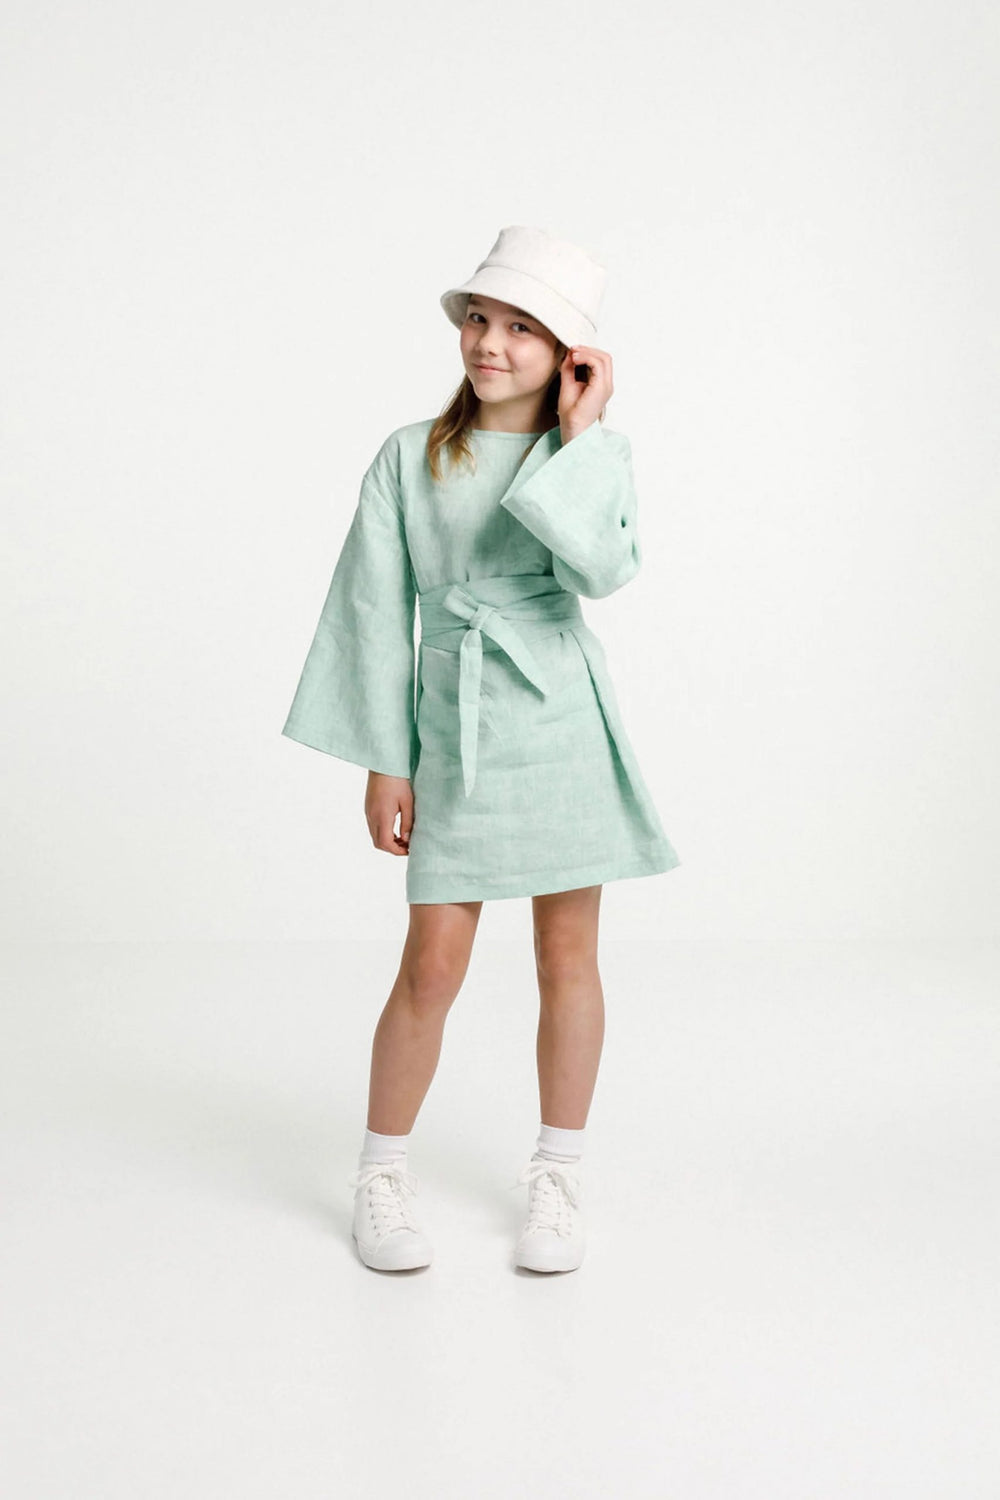 Child wearing the Array Dress sewing pattern from Papercut Patterns on The Fold Line. A dress pattern made in cotton, linen, rayon or medium weight jersey fabrics, featuring wide flared sleeves, straight-cut body, extra-long wrap-around waist ties and sli